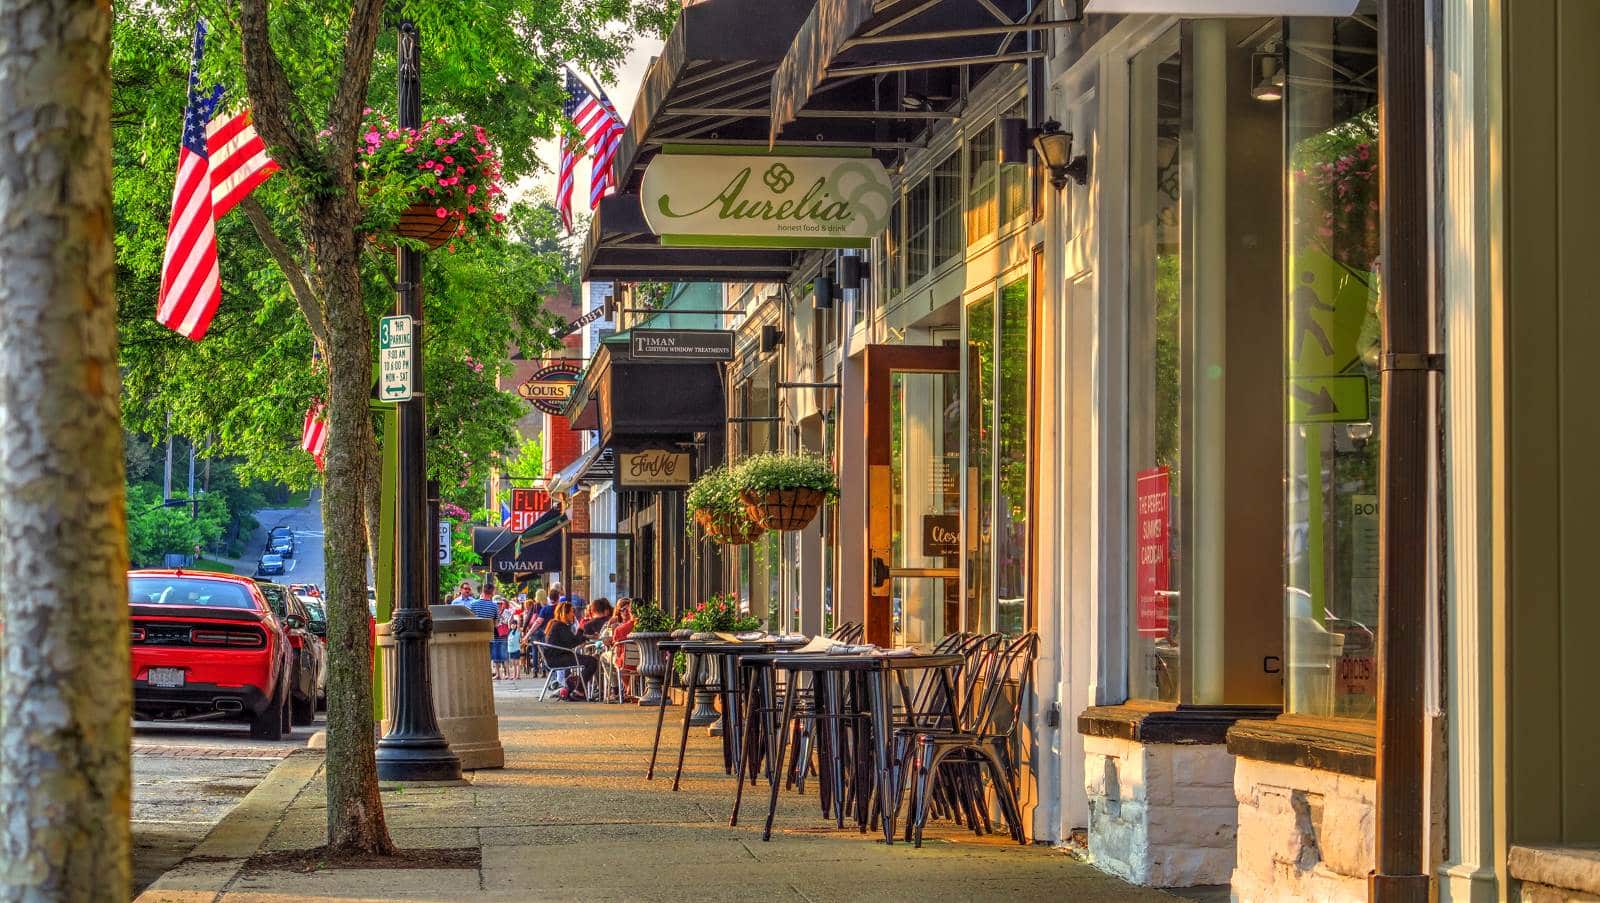 Image Credit: Shutterstock / Lynne Neuman <p><span>This village epitomizes small-town charm with its natural waterfalls and historic downtown. It offers a safe, welcoming environment for raising kids and a restful, picturesque setting for retirement.</span></p>